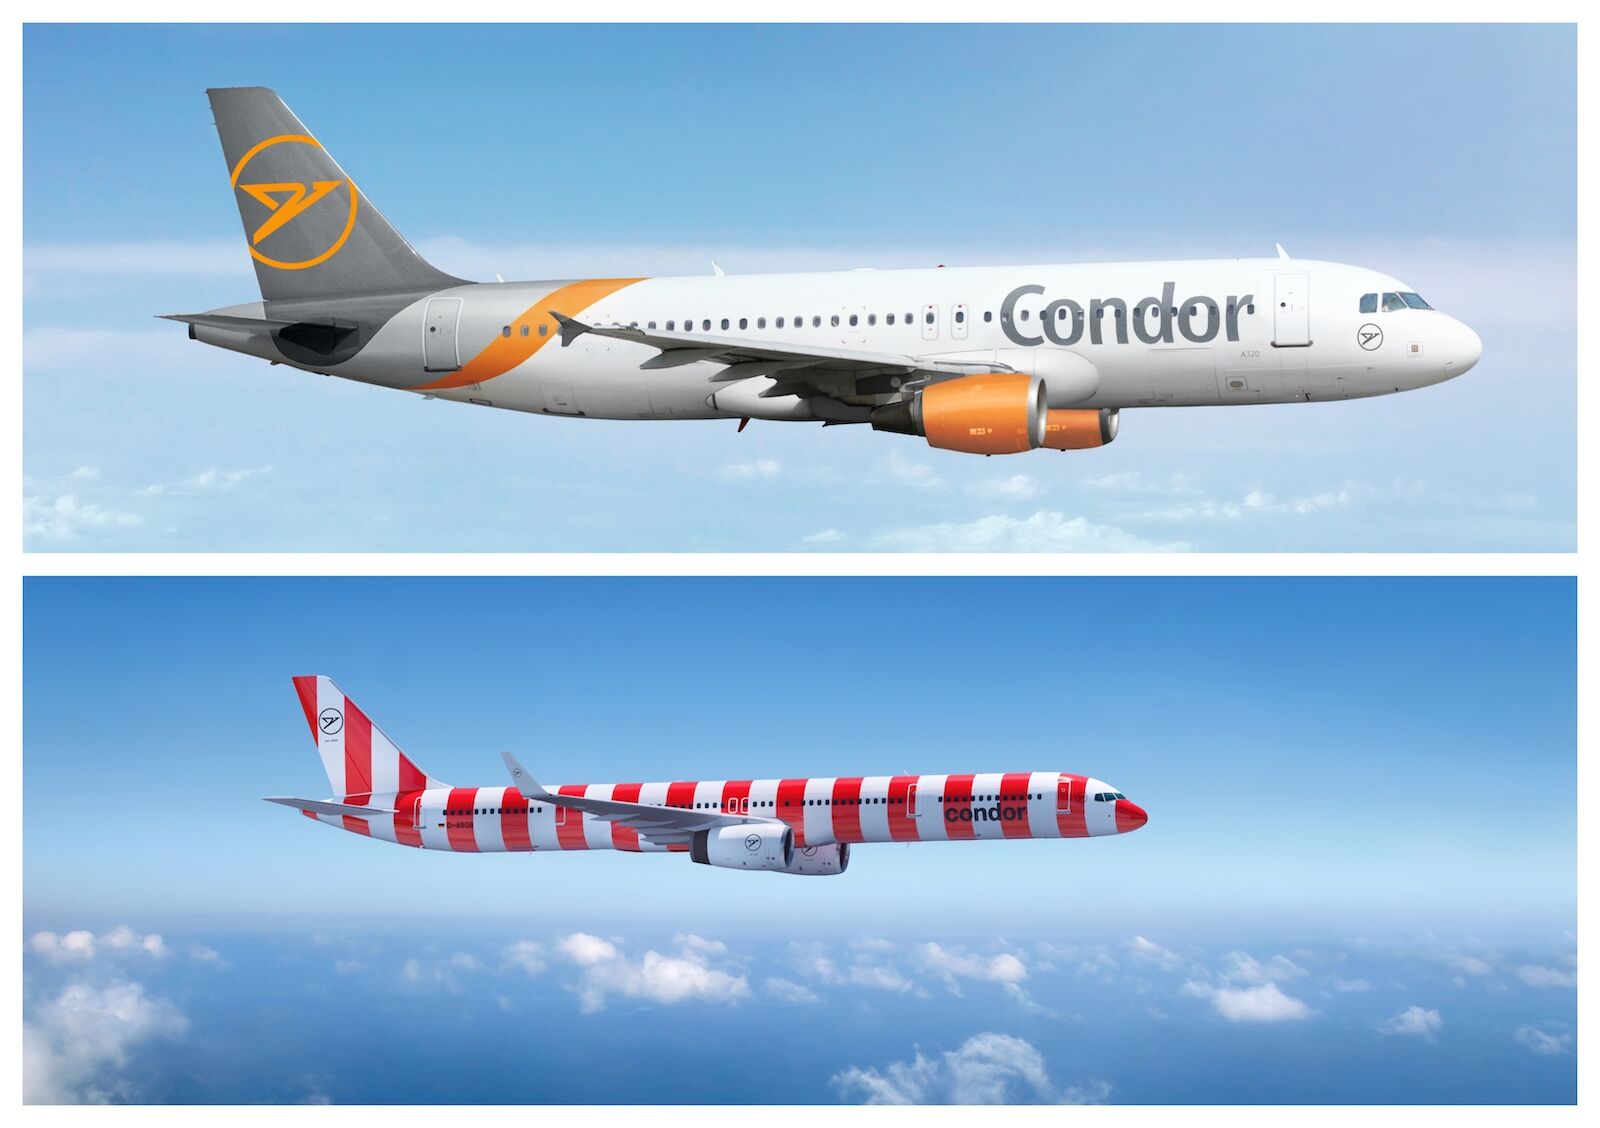 Condor's new paint job for its fleet of airplanes are big colorful stripes